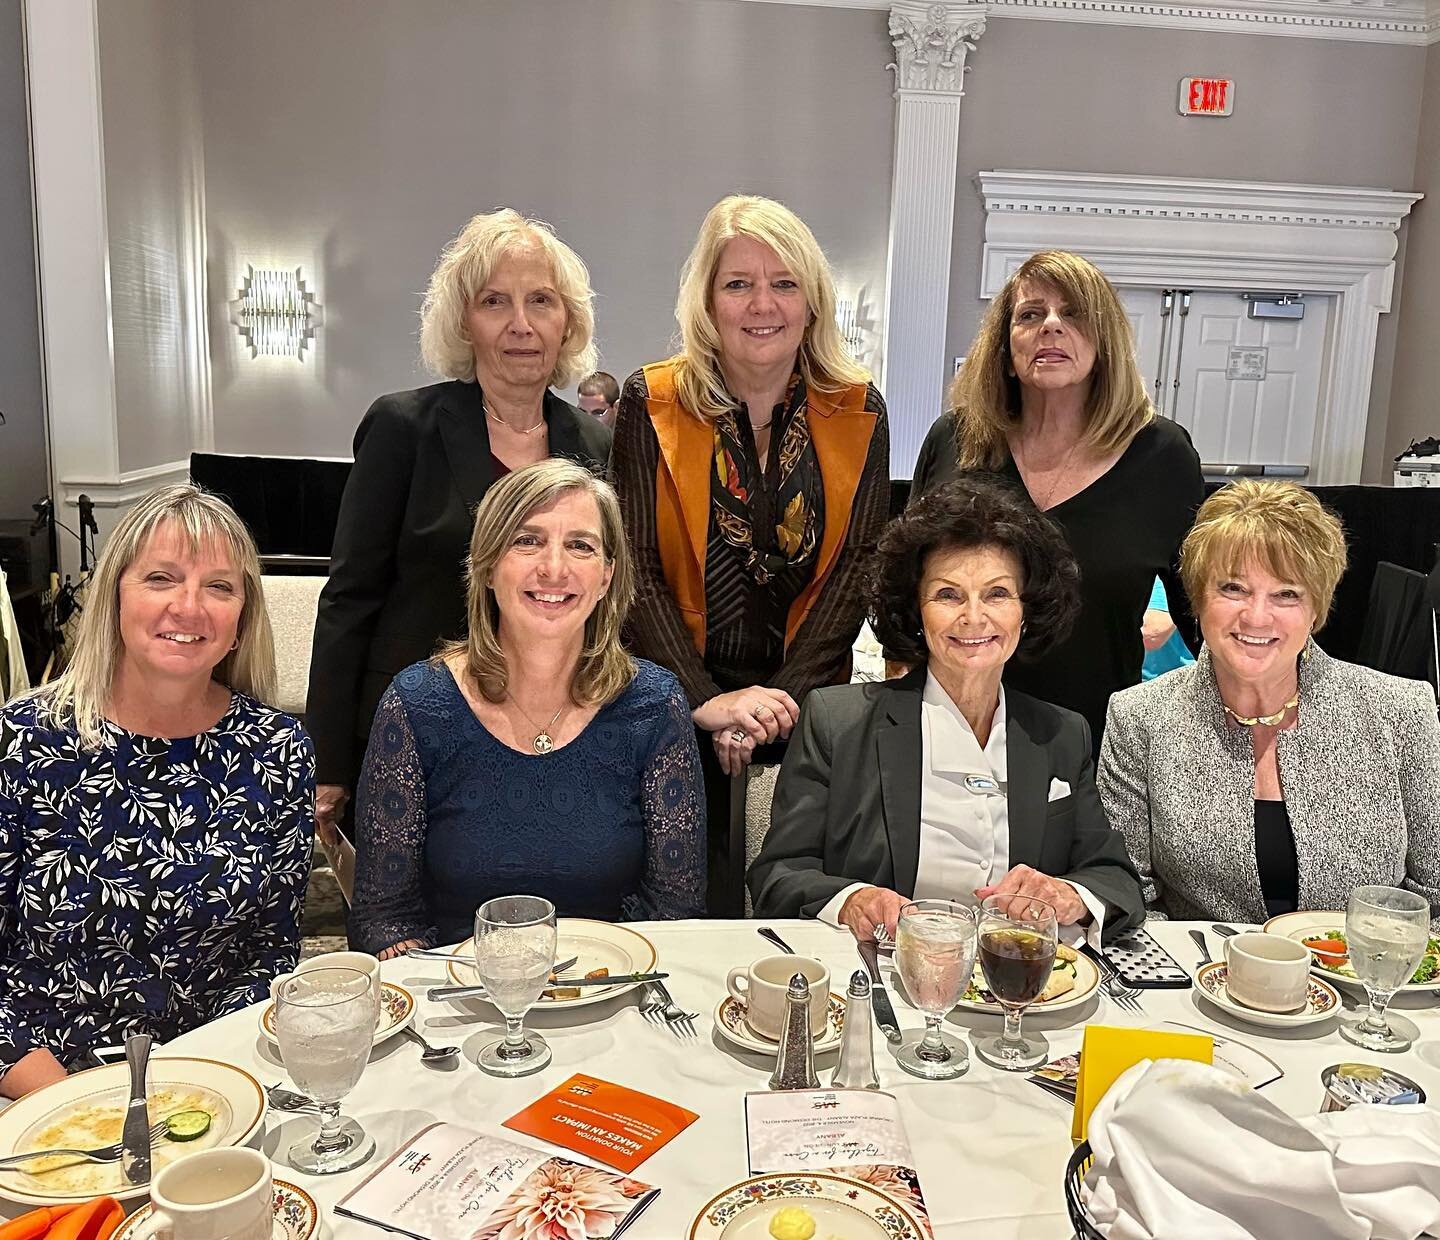 Proud to support this year&rsquo;s #multiplesclerosis &ldquo;Together for a Cure&rdquo; event at The Crowne Plaza in Albany, NY. #berkshirehathawayhomeservices #realtors #community #supporters